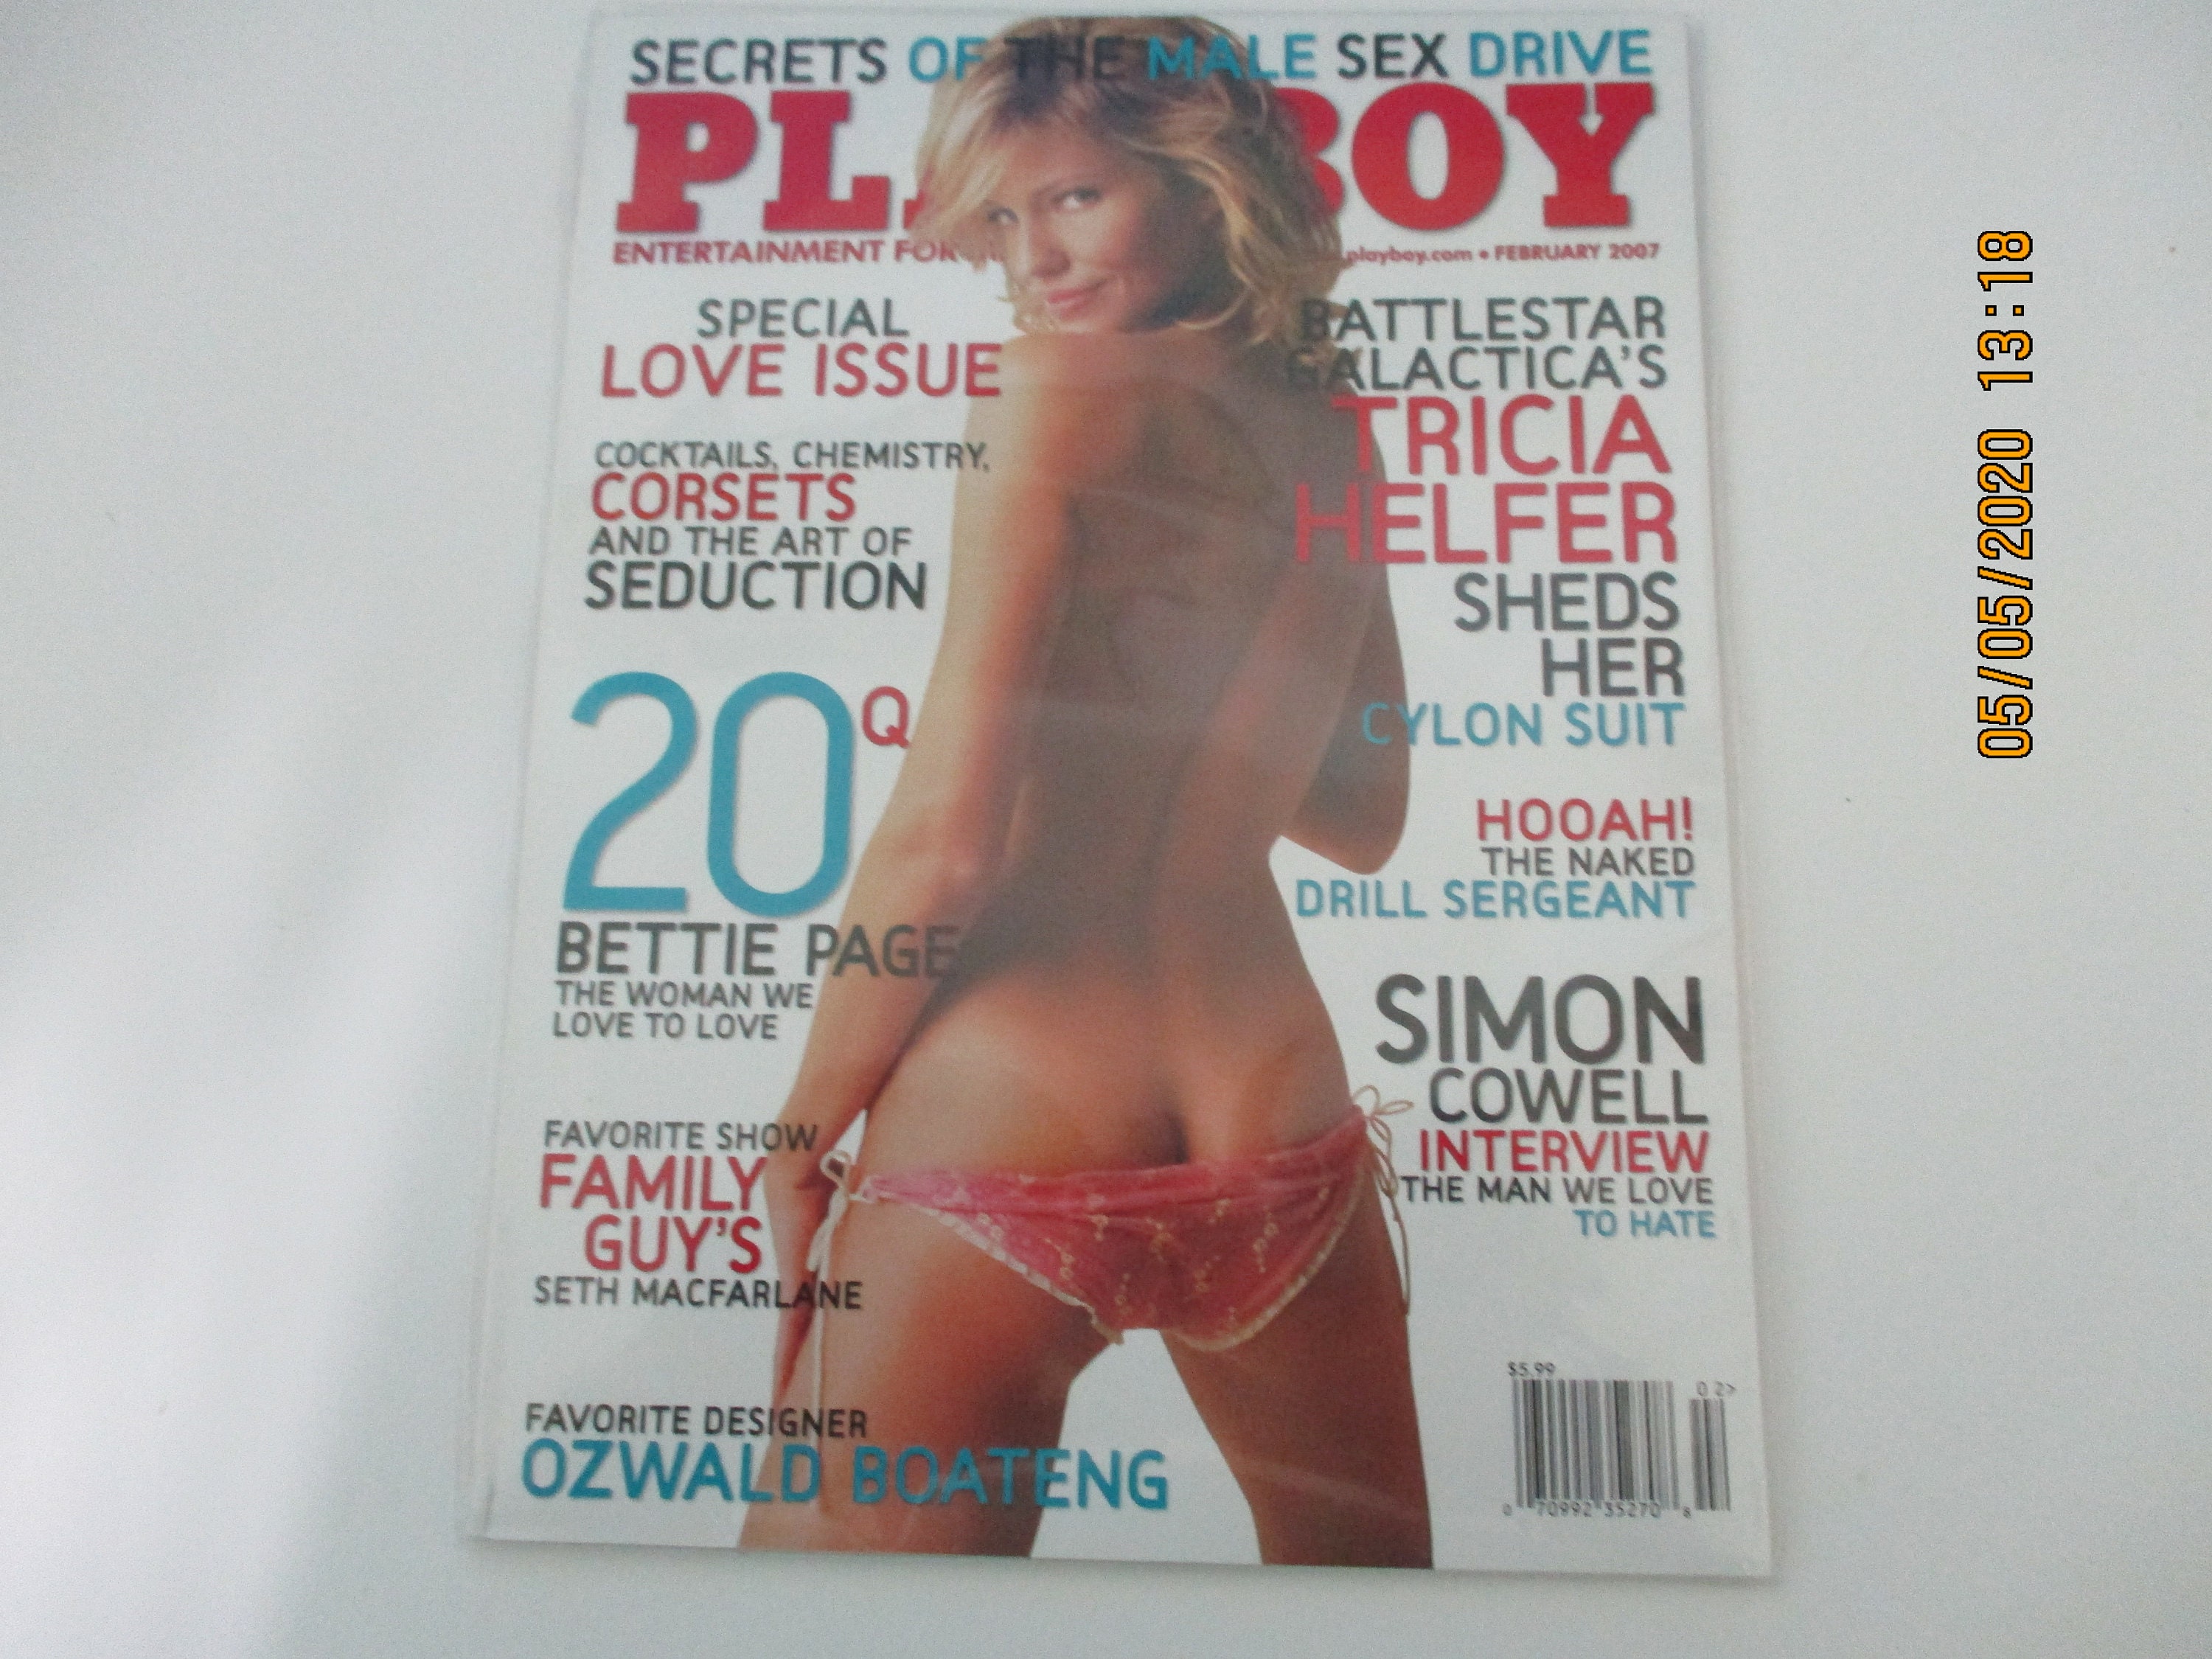 adrian mead share tricia helfer playboy pictures photos